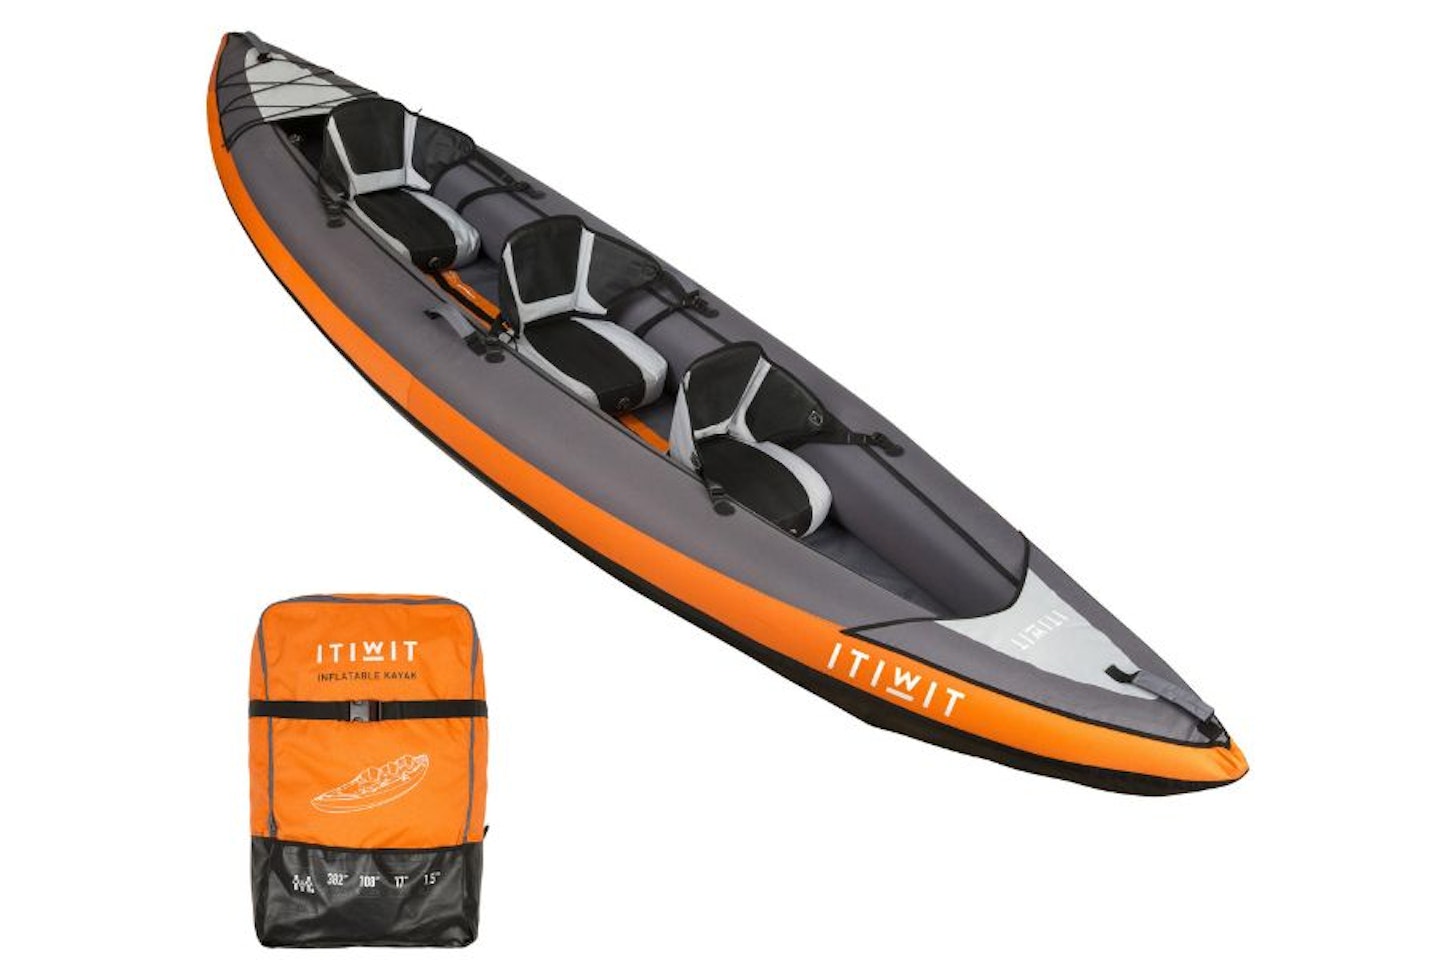 Itiwit 100 2/3 Person Touring Inflatable Kayak - one of the best three-person inflatable kayaks